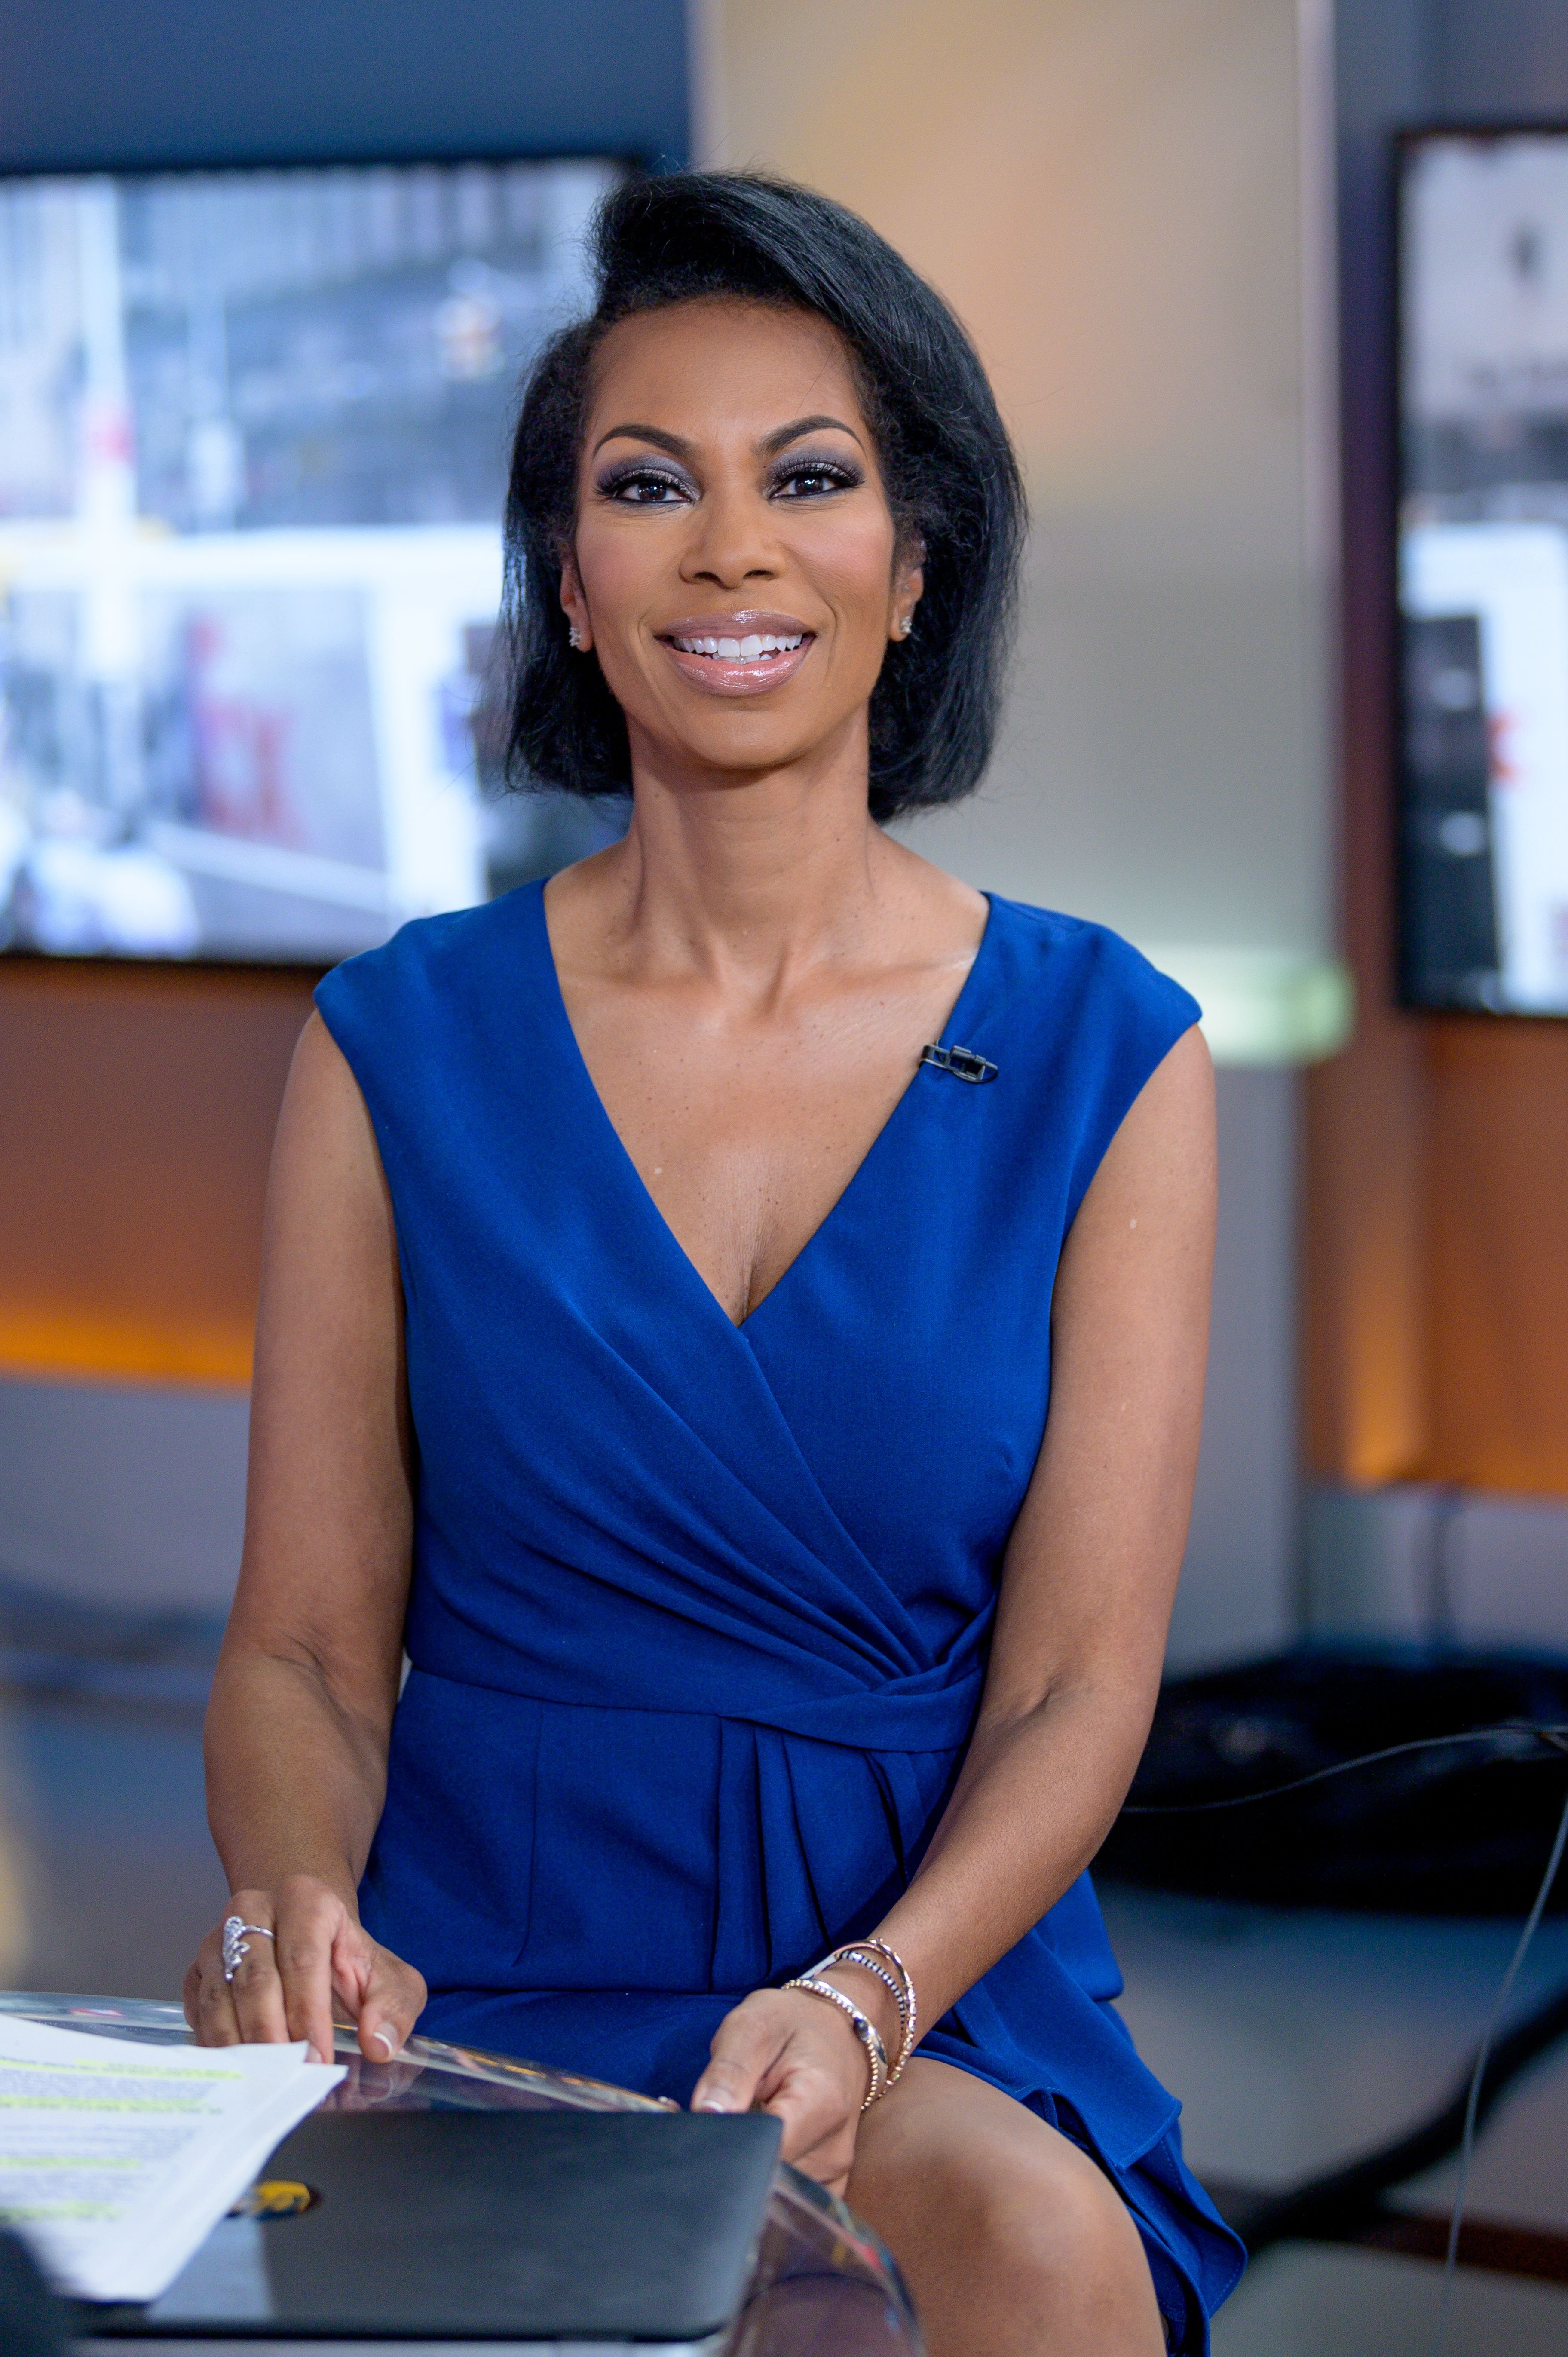 Anchor Harris Faulkner as former New York Times Executive Editor Jill Abramson visits "Outnumbered Overtime" at Fox News Channel Studios on September 18, 2019 in New York City. | Photo: Getty Images